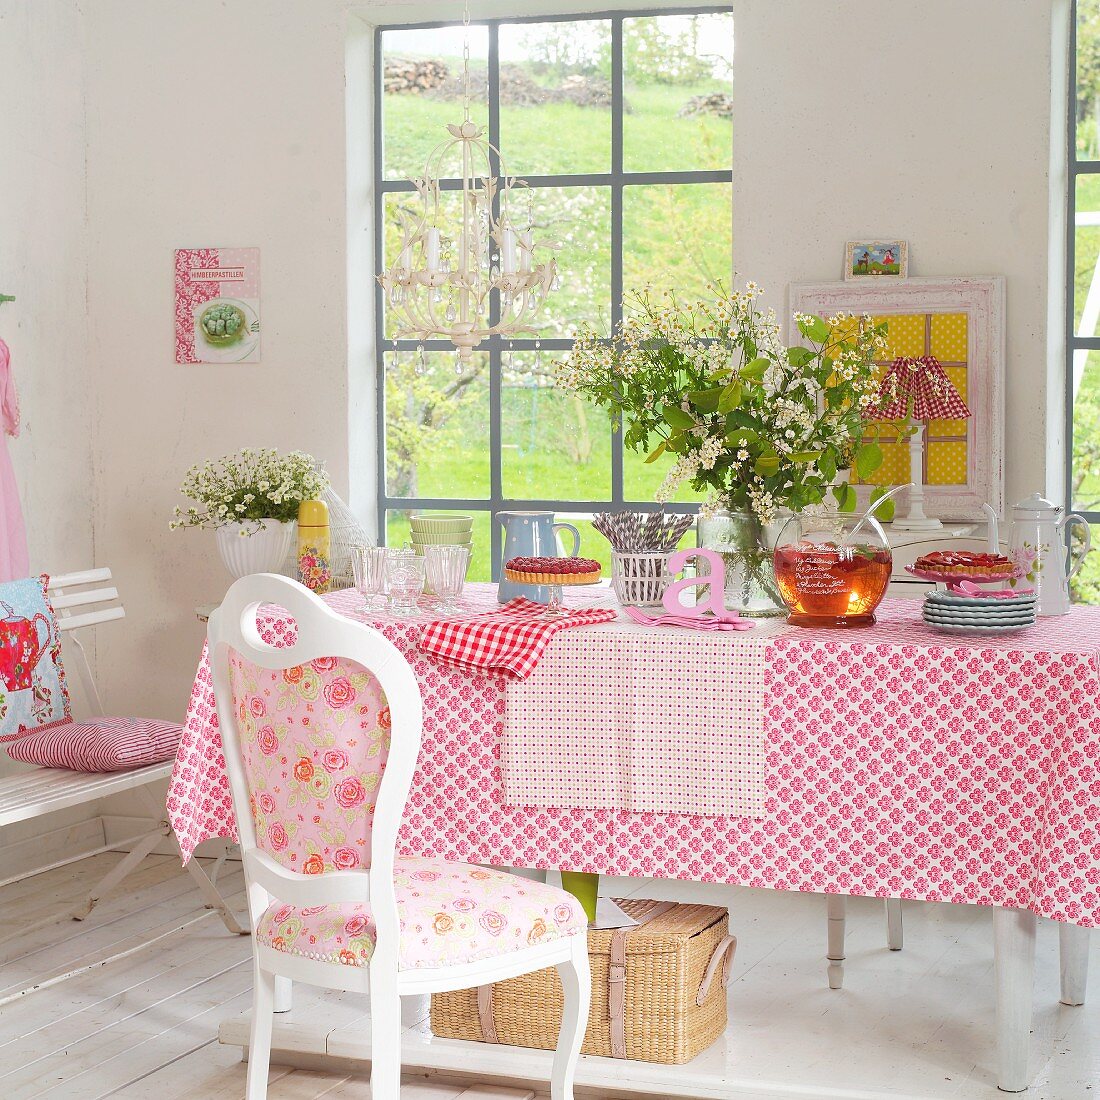 Spring bouquet on table with patterned tablecloth and place mats and vintage chair with country-house-style upholstery